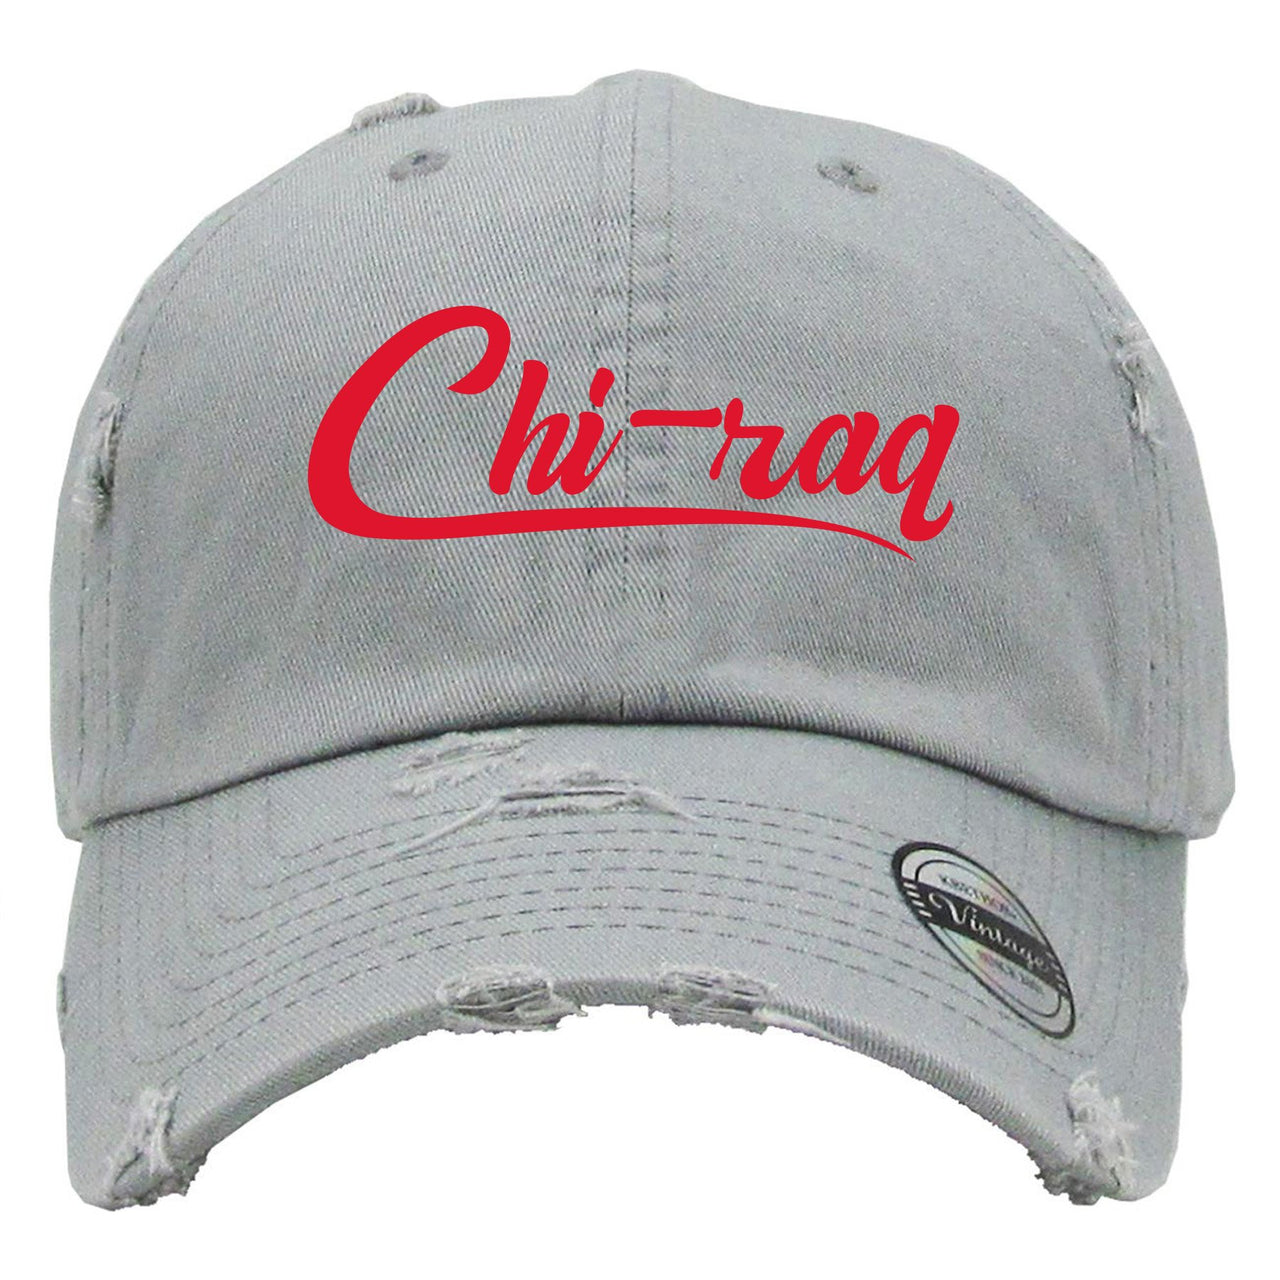 Reflections of a Champion 8s Distressed Dad Hat | Chiraq Script, Gray